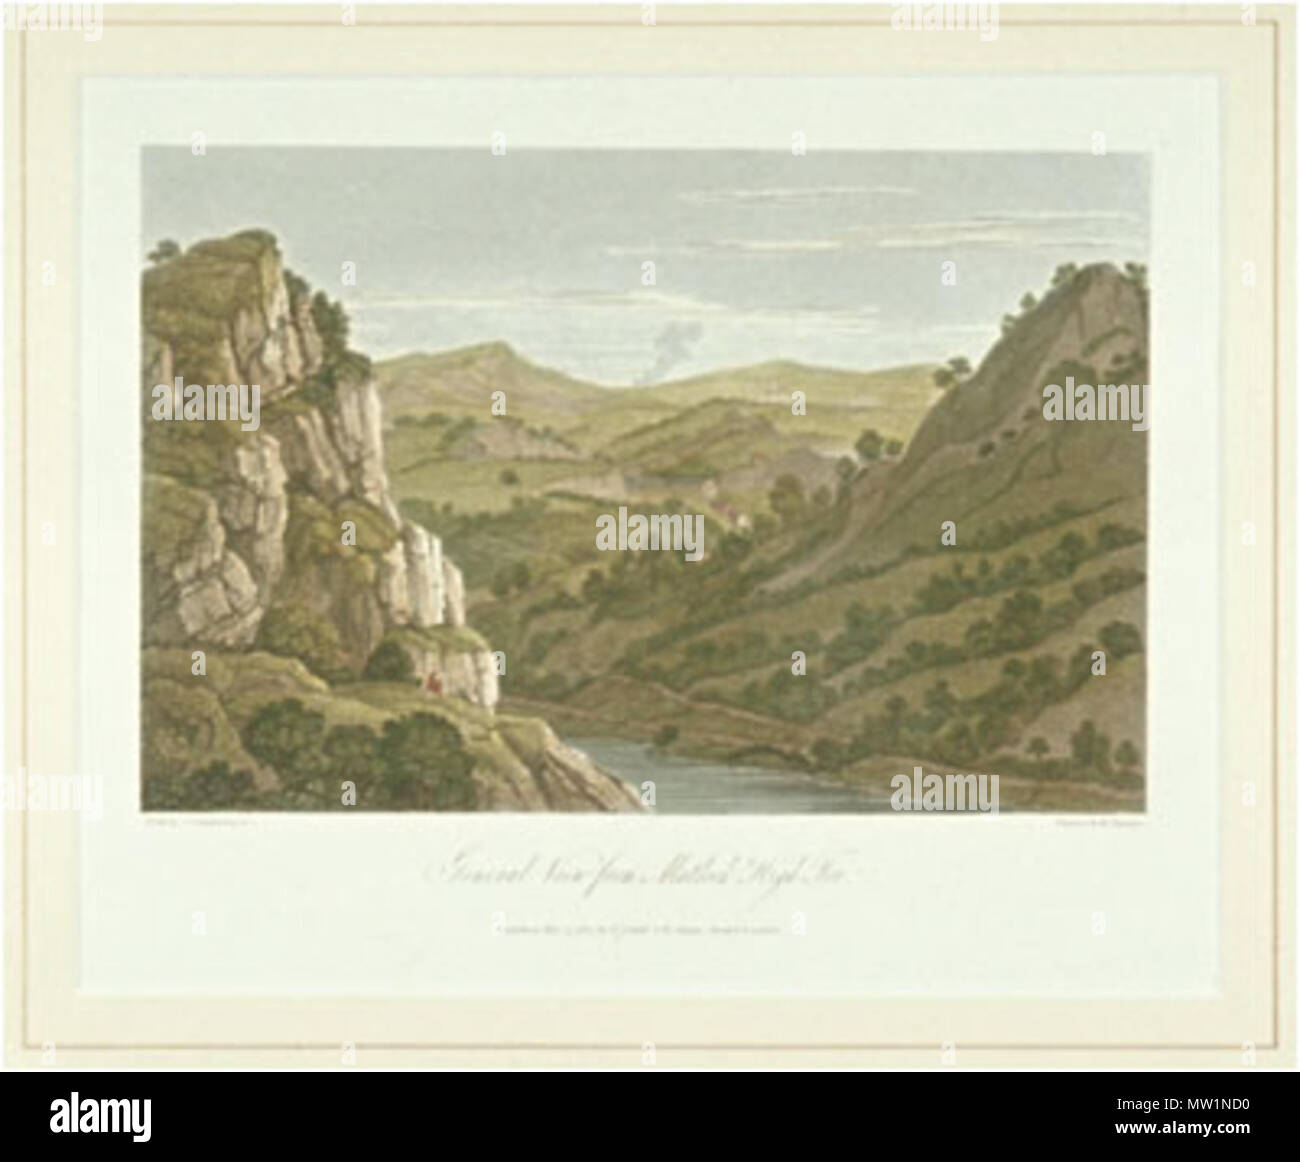 . General View from Matlock High Tor in derbyshire. Artist:Joseph FARINGTON Title:General View from Matlock High Tor Publication Title Britannia Depicta, Part VI, Derbyshire Date published 15 May 1817 Medium Coloured engraving Lettering below image: [left] Drawn by J. Farington Esq.r R.A. [right] Engraved by John & Letitia Byrne. / Matlock Church. / Published May 15, 1817, by T. Cadell & W. Davies, Strand, London Published T. Cadell & W. Davies, Strand, London, 15 May 1817 Acquisition Purchased from Sotheby's by GAC, 22 February 1977 Number 13030 . 15 May 1817. Joseph FARINGTON engraved by 631 Stock Photo